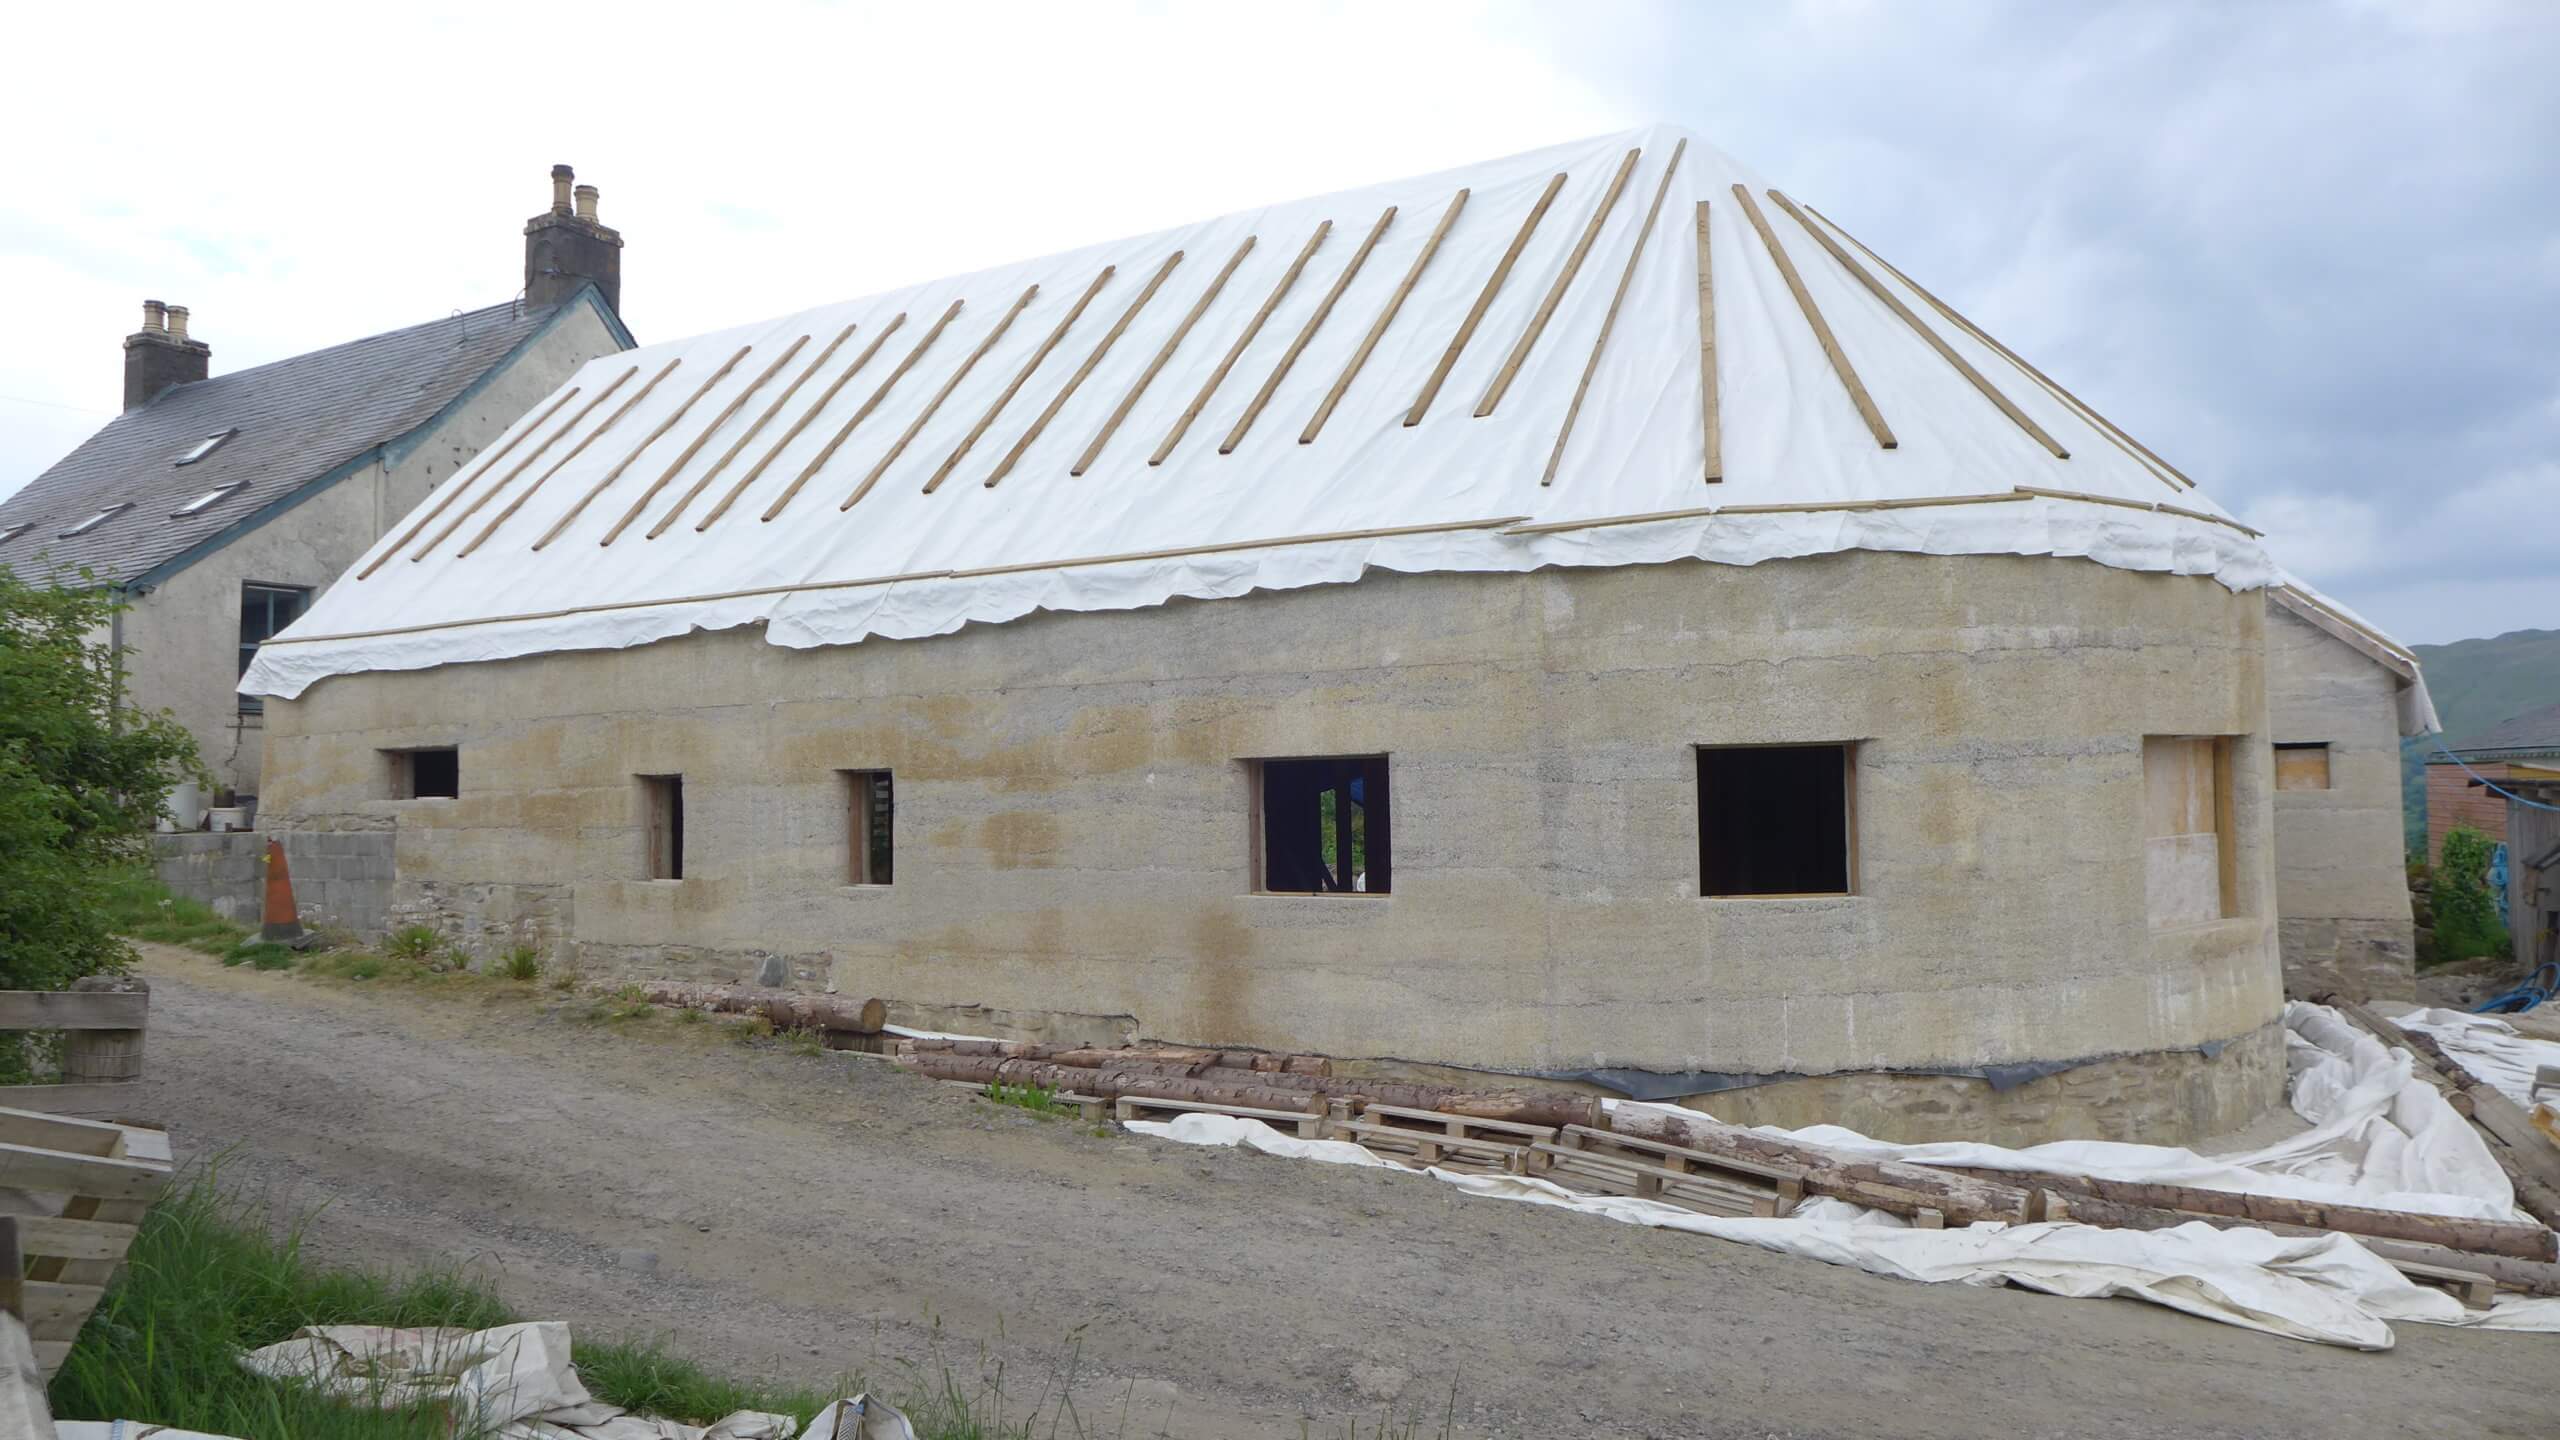 new build hempcrete construction in Scotland with temporary roofing cover